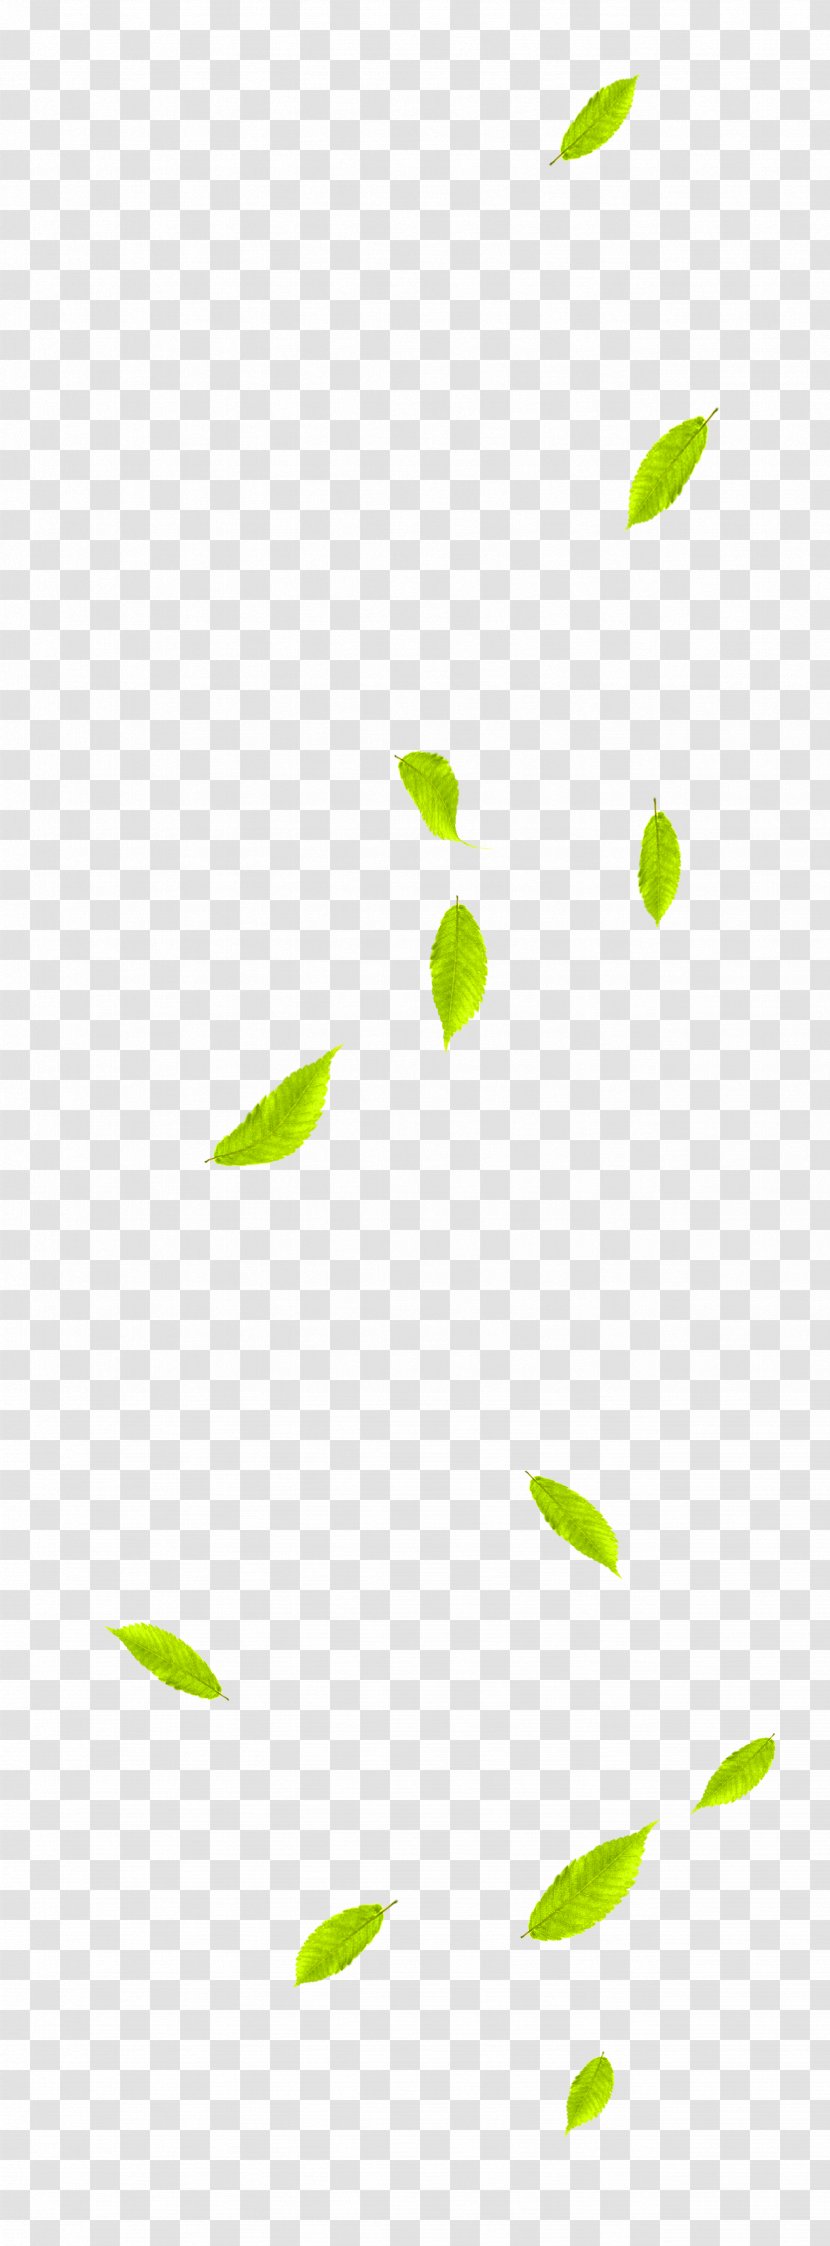 Leaf Green - And Fresh Leaves Floating Material Transparent PNG